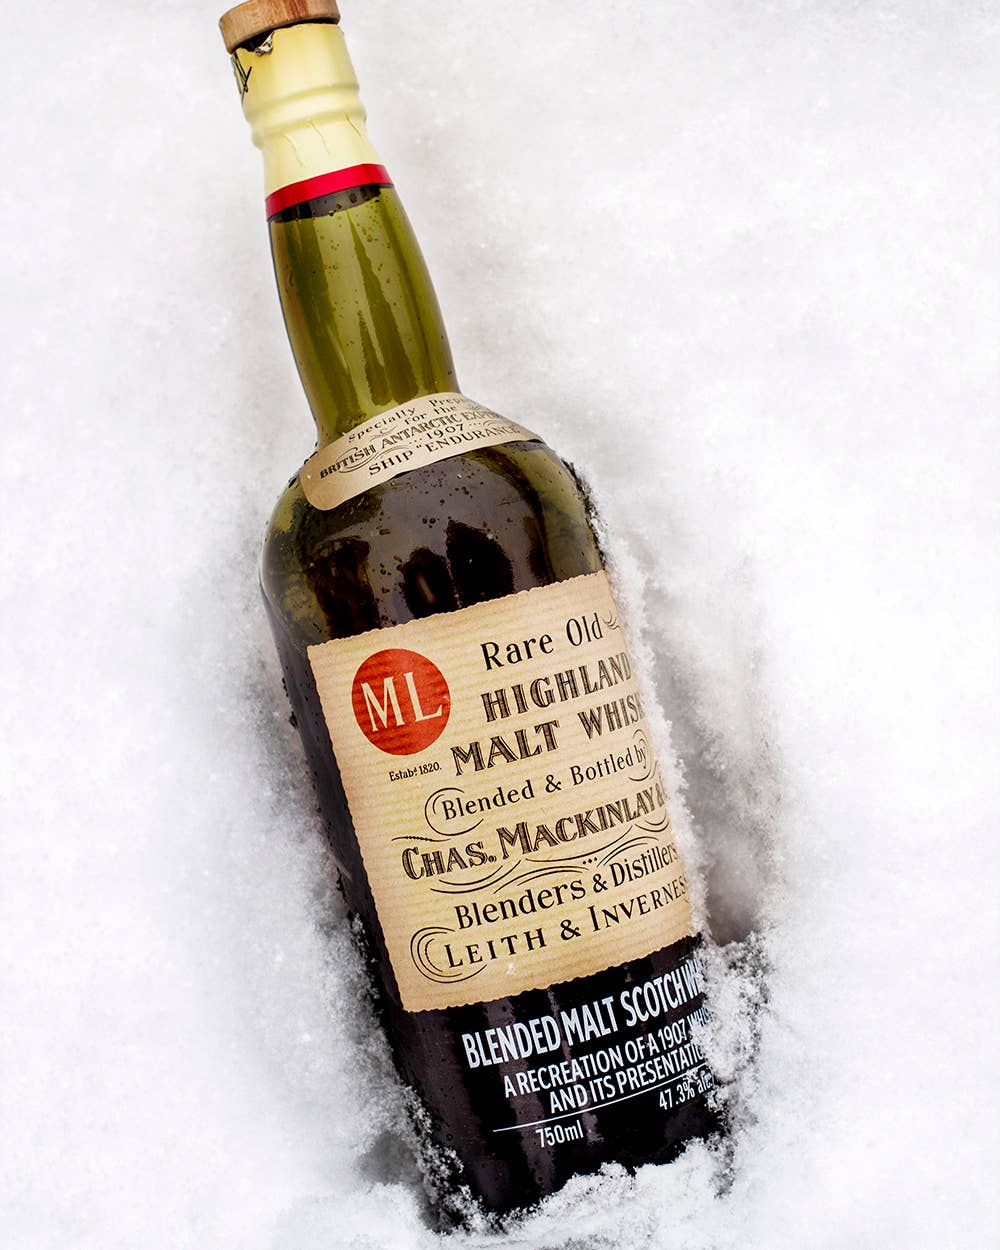 Drink This Now: Mackinlay’s Shackleton Rare Old Highland Malt